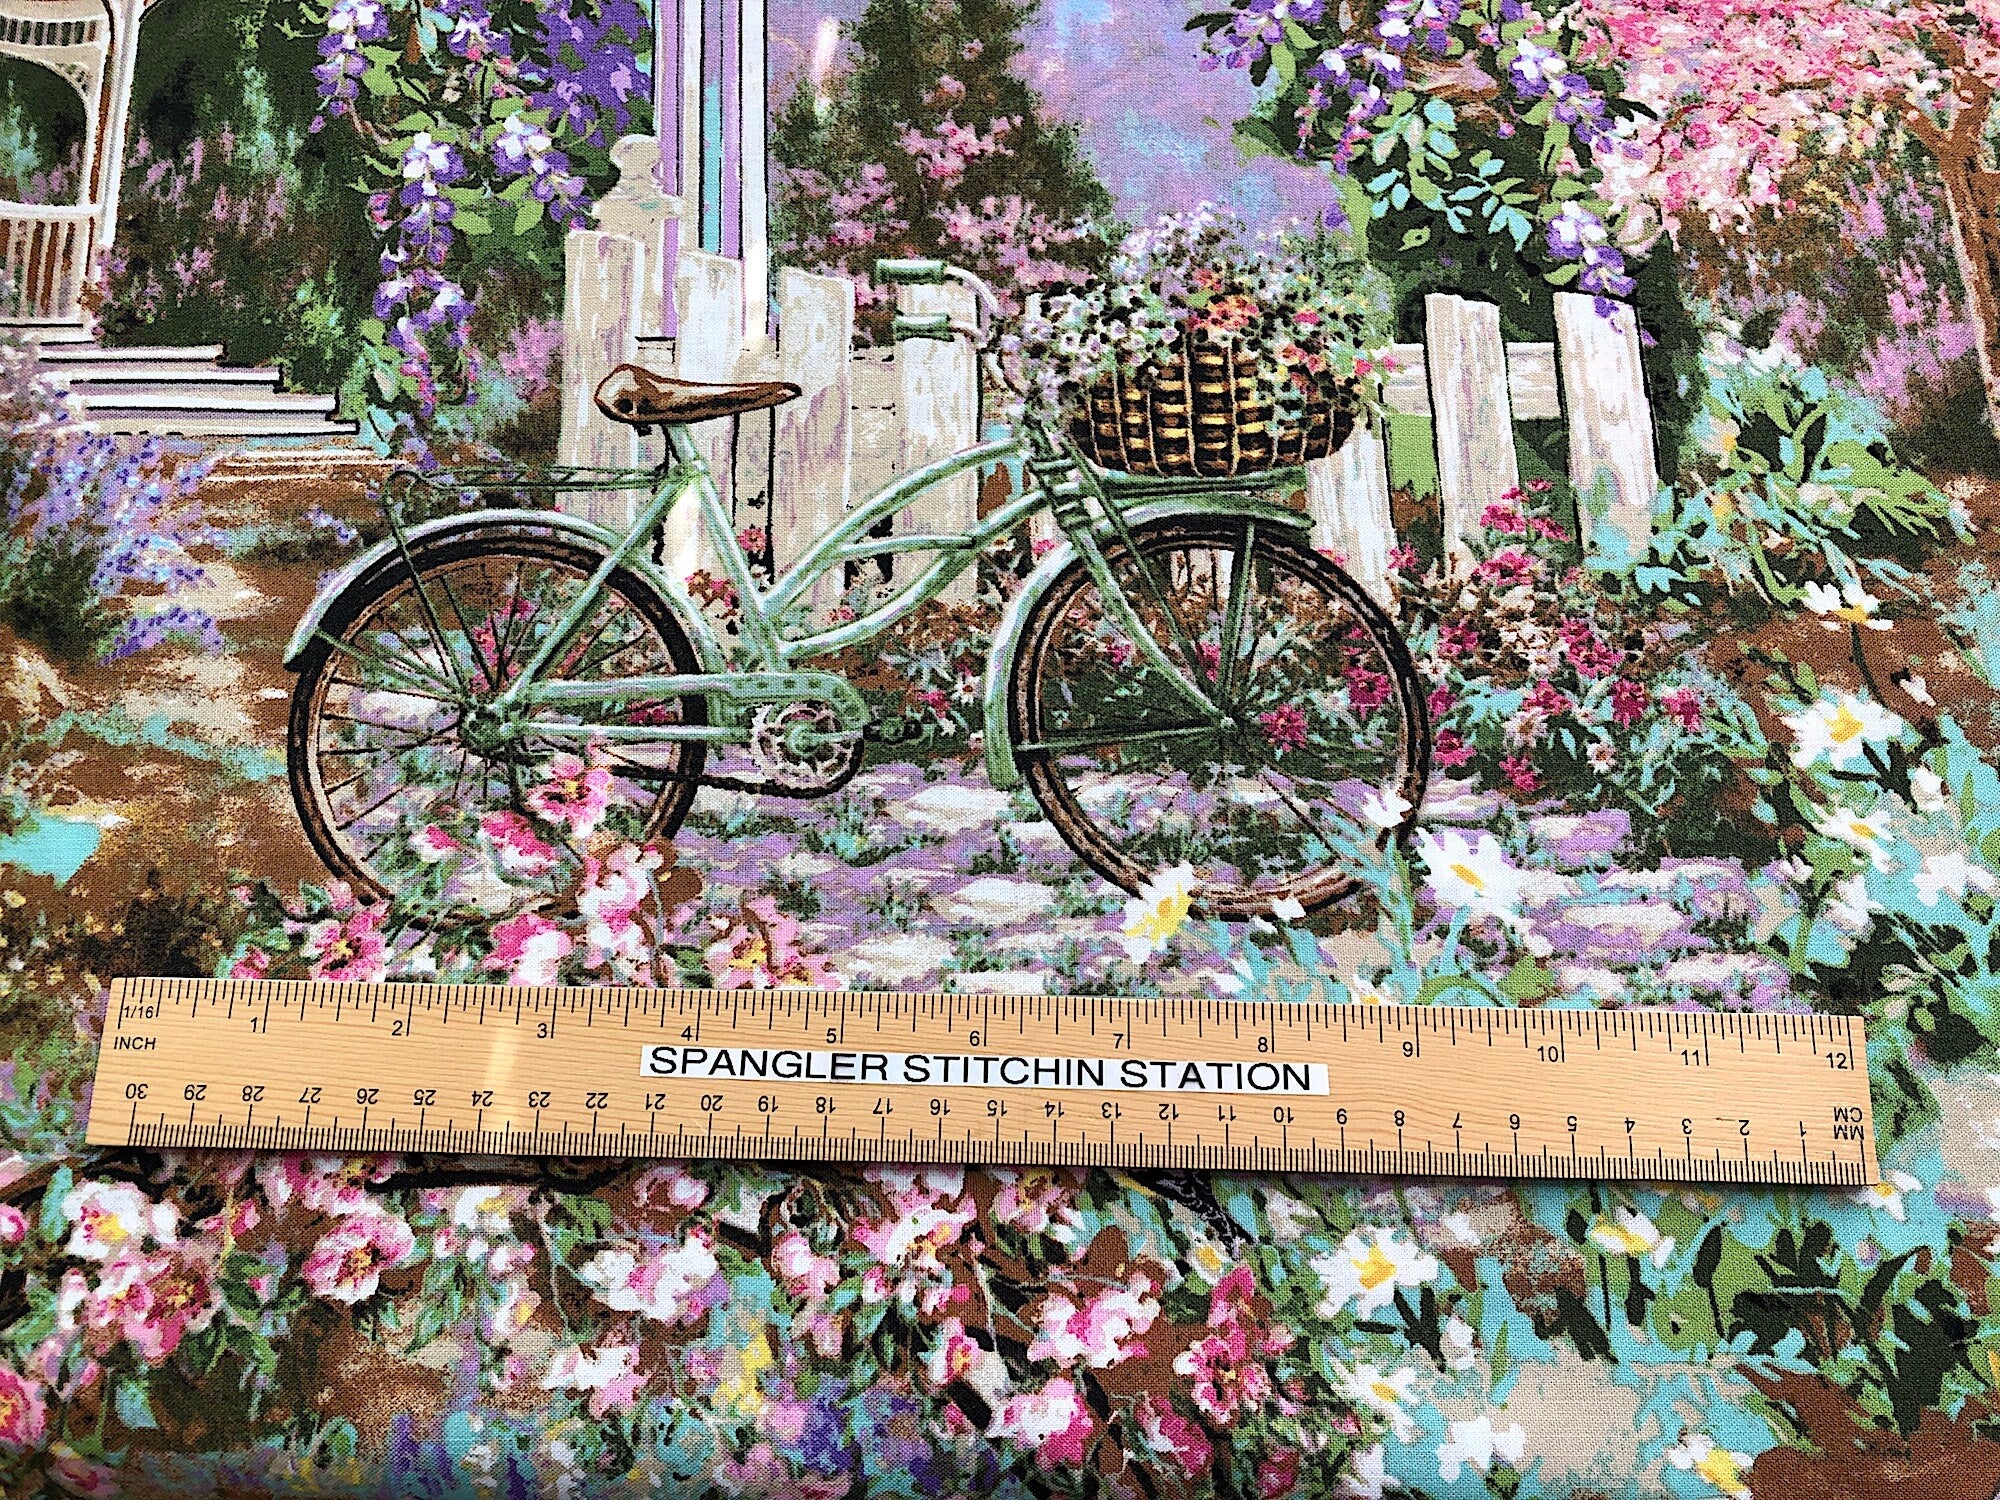 Ruler on fabric to show the size of the bike.